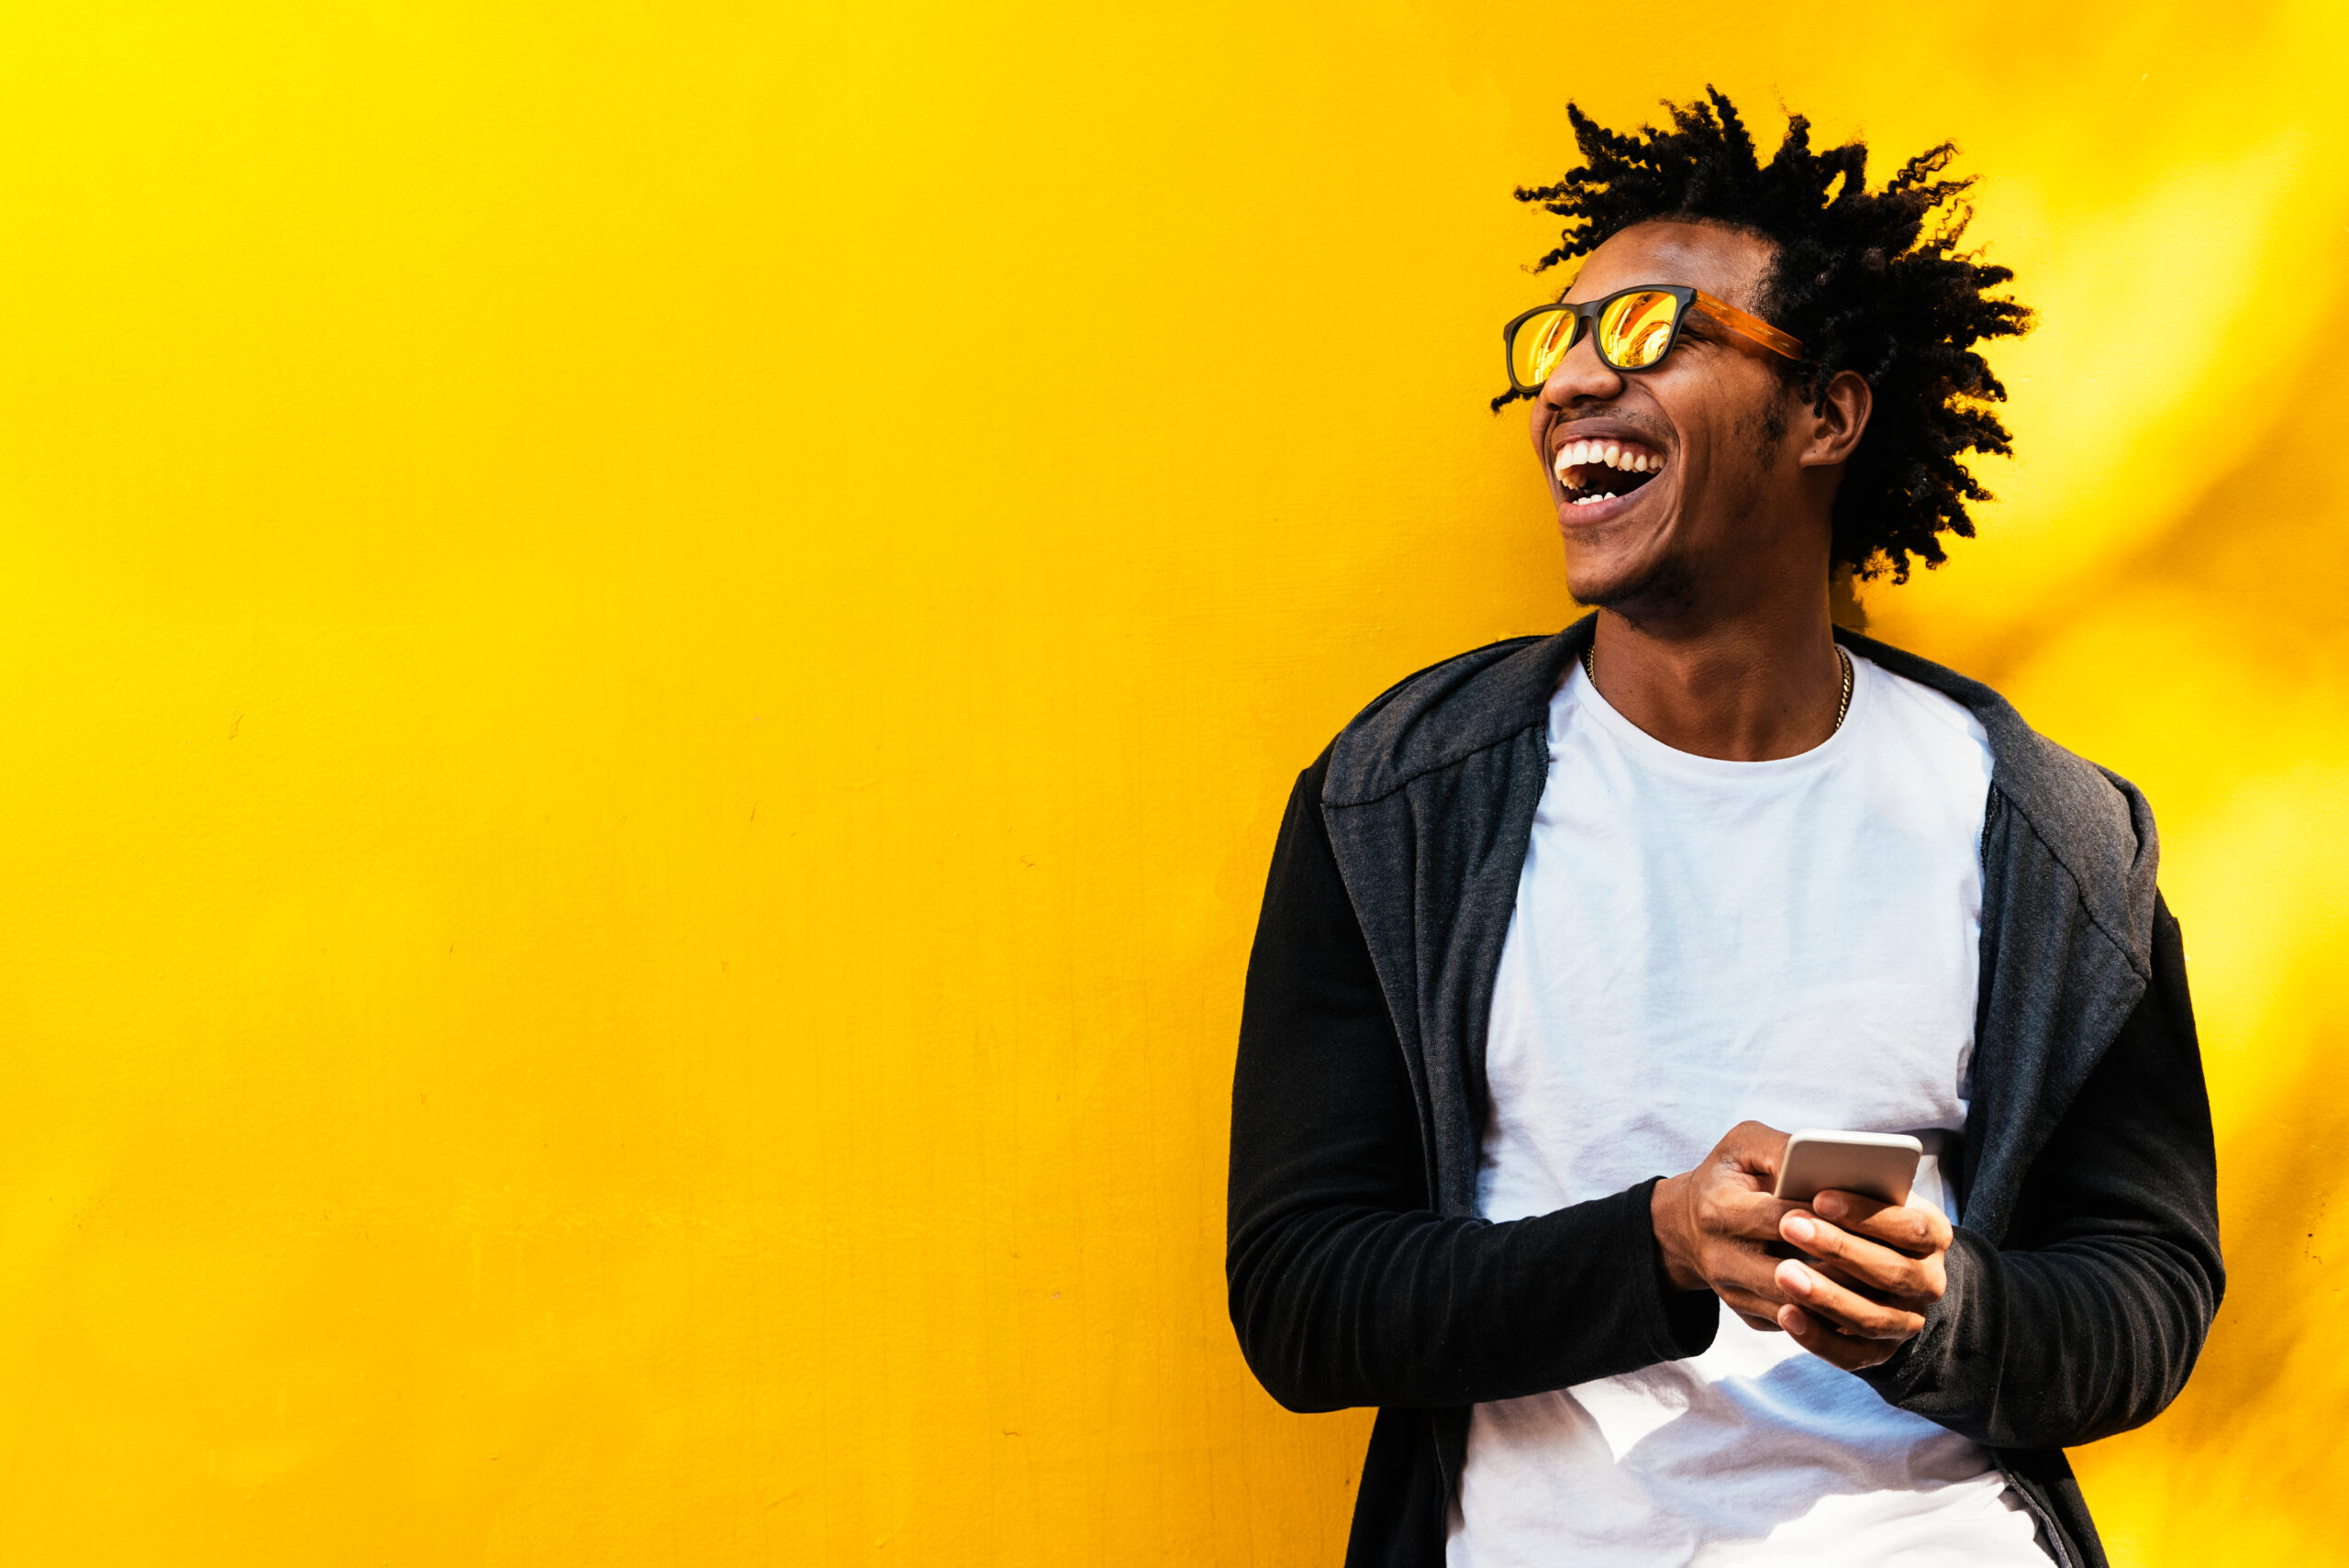 Man holding cellphone smiling on yellow background